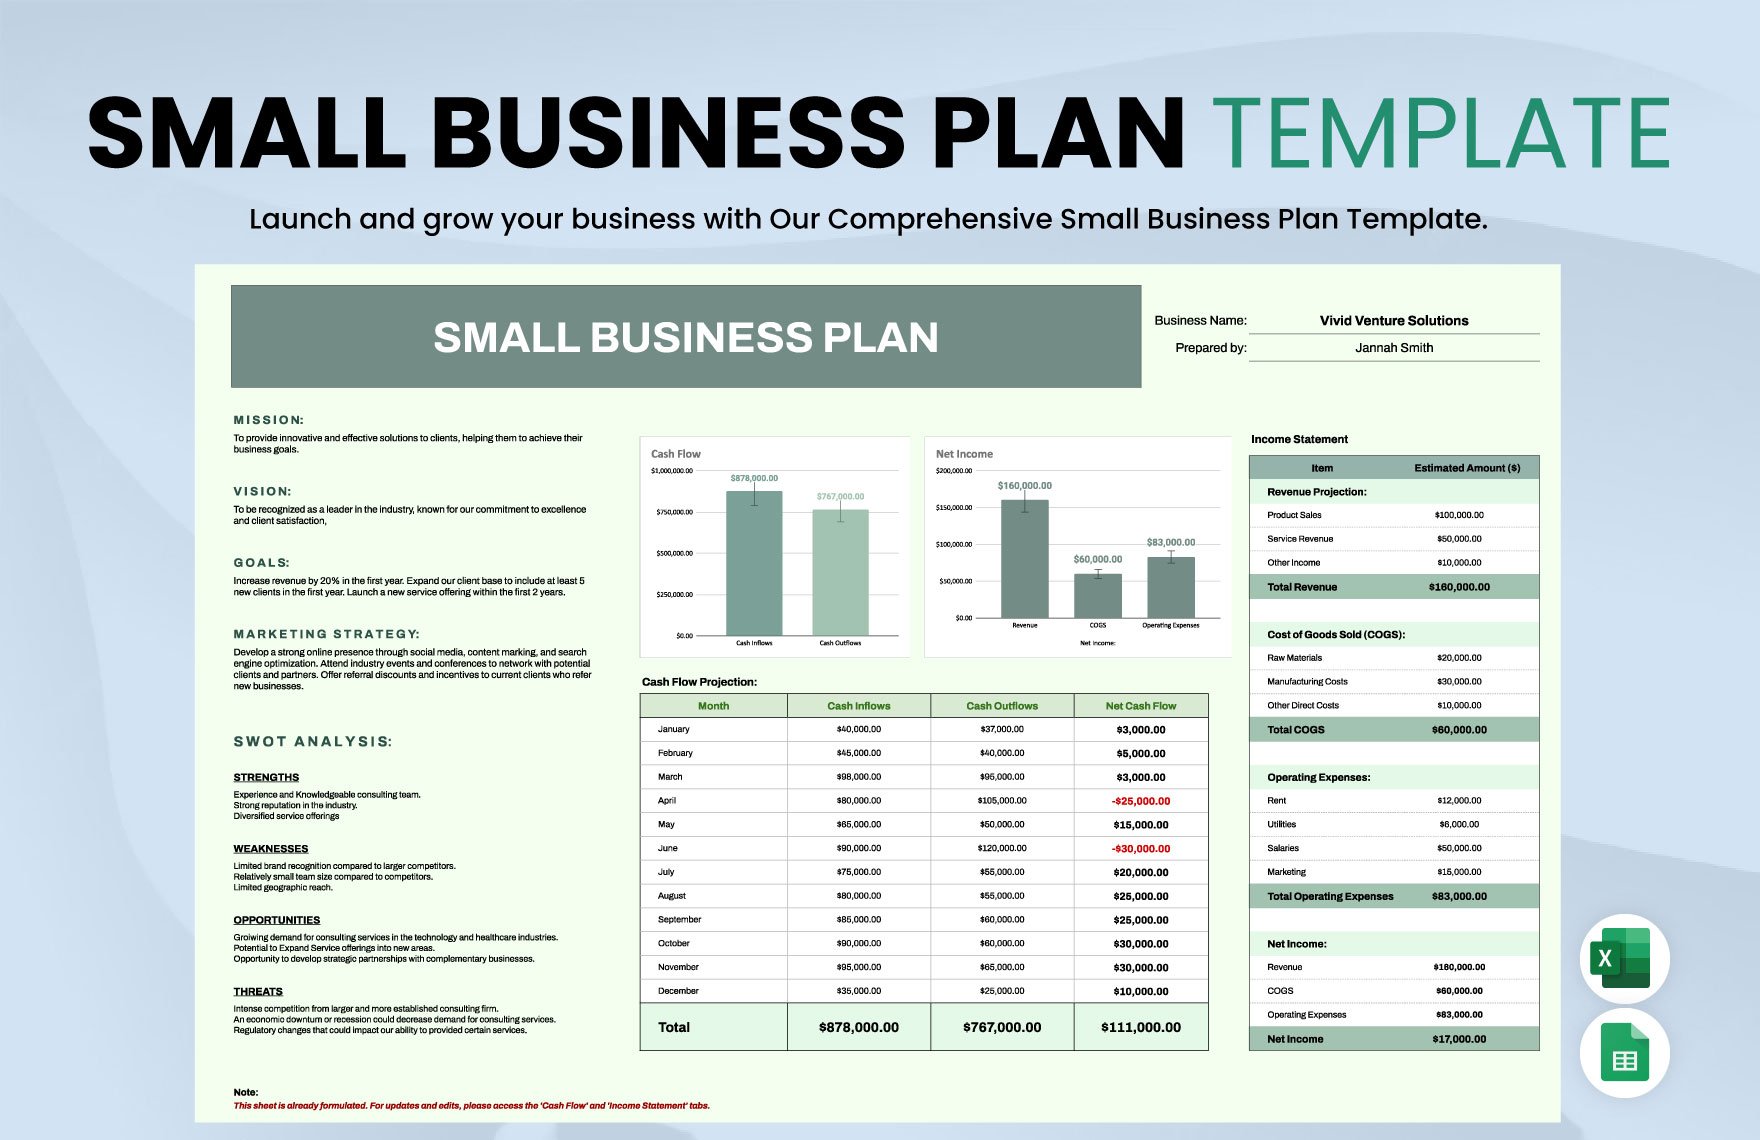 Small Business Plan Template in Excel, Google Sheets